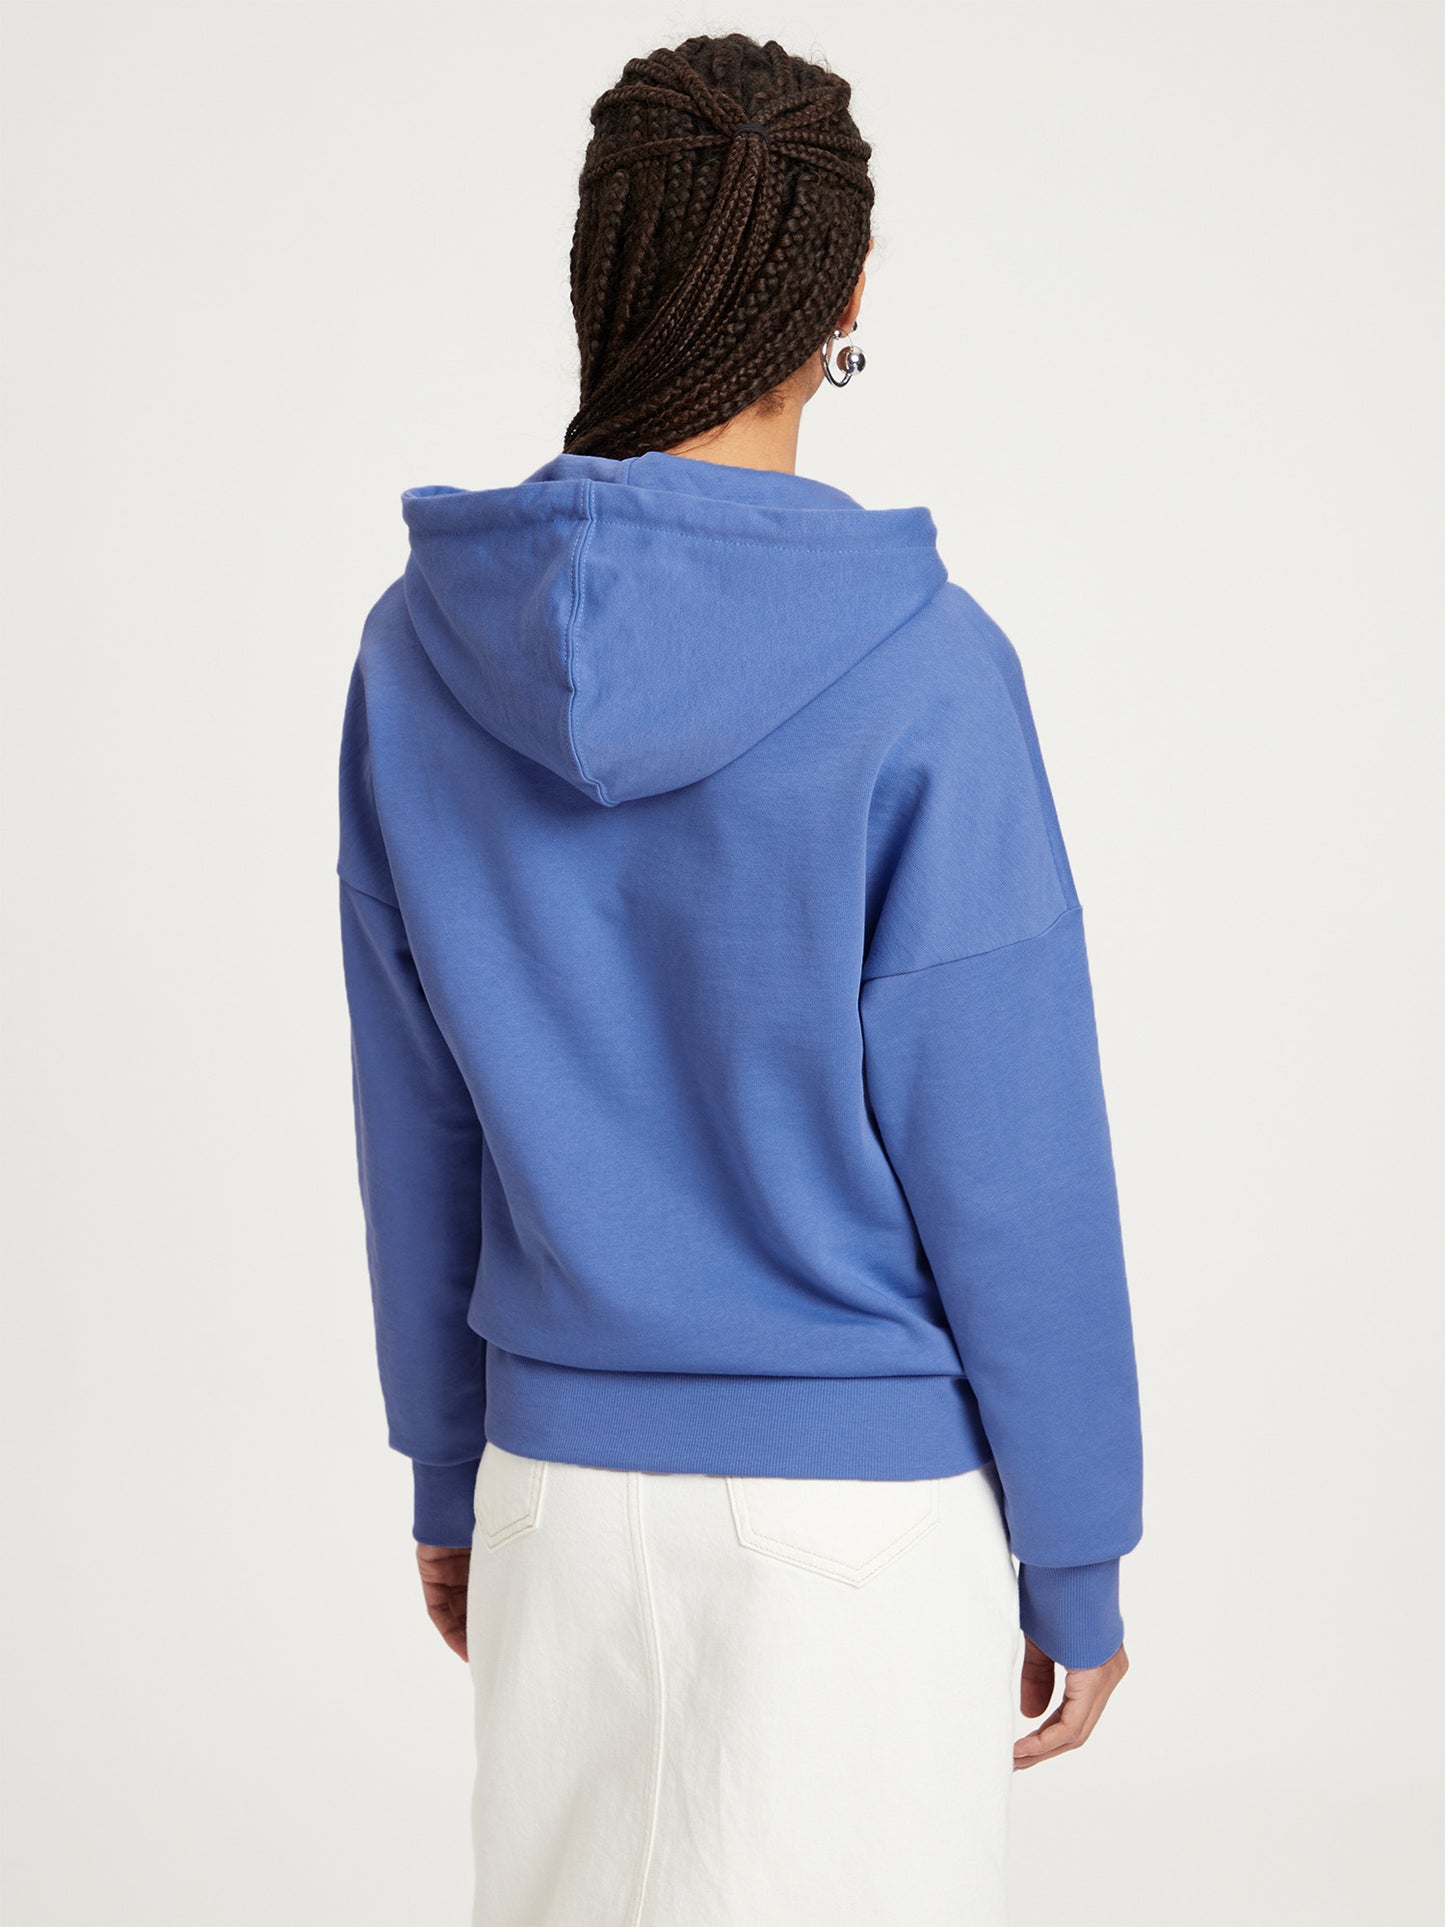 Women's regular hoodie with two pockets, blue.